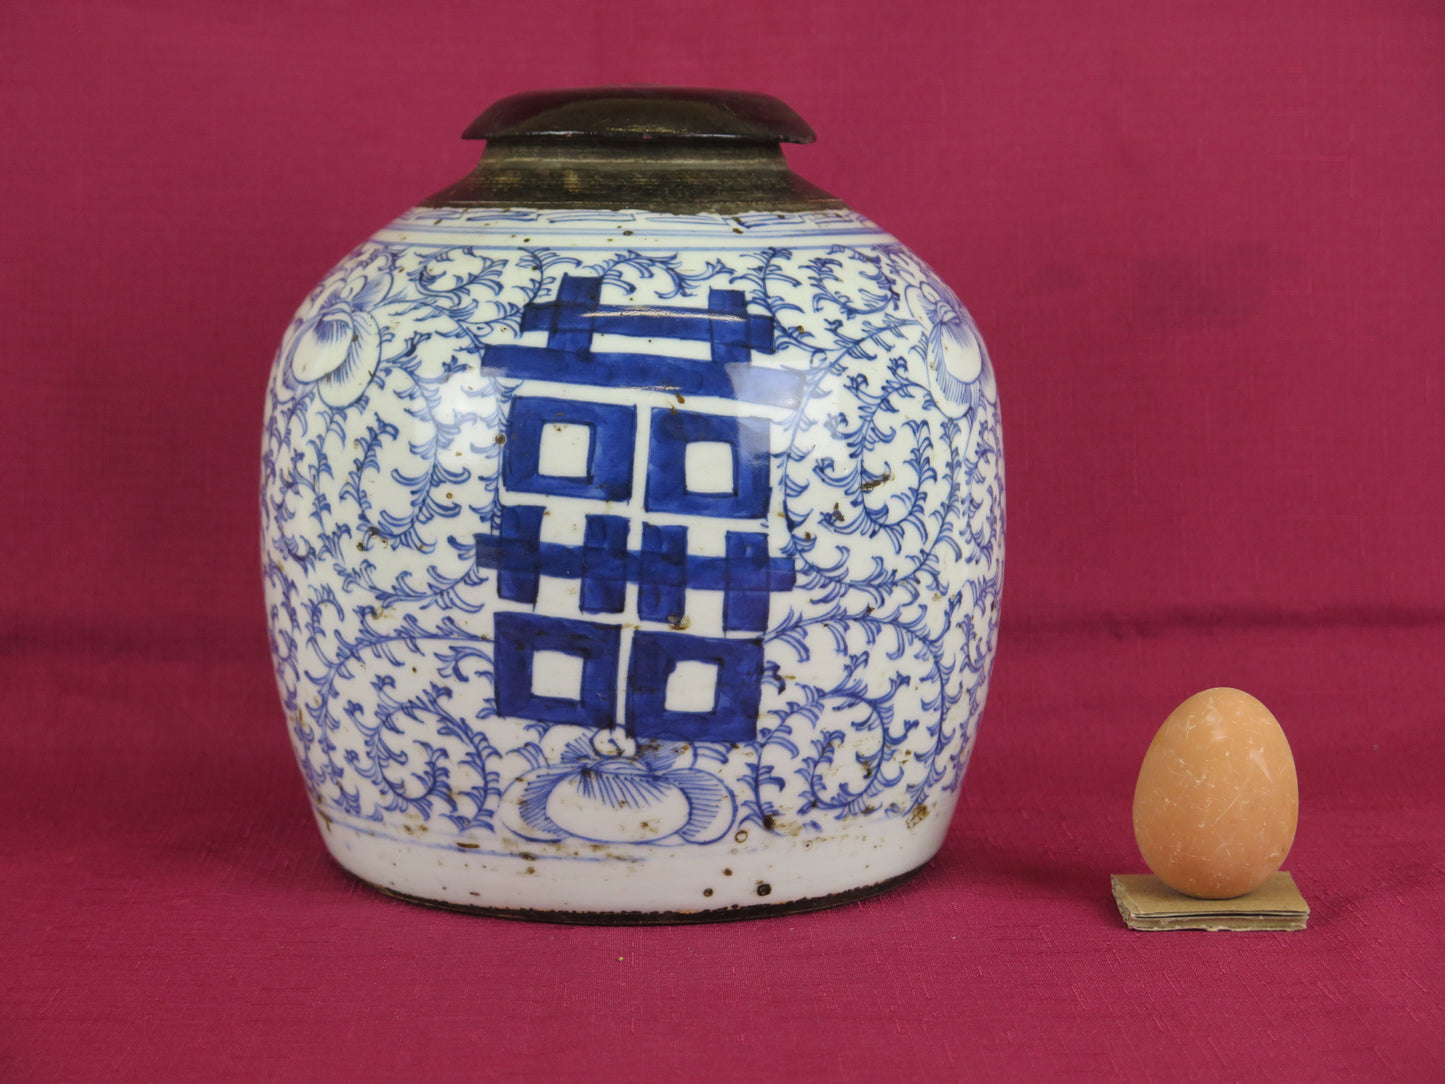 Antique blue white ceramic china vase collection of happiness Chinese wedding China CM2